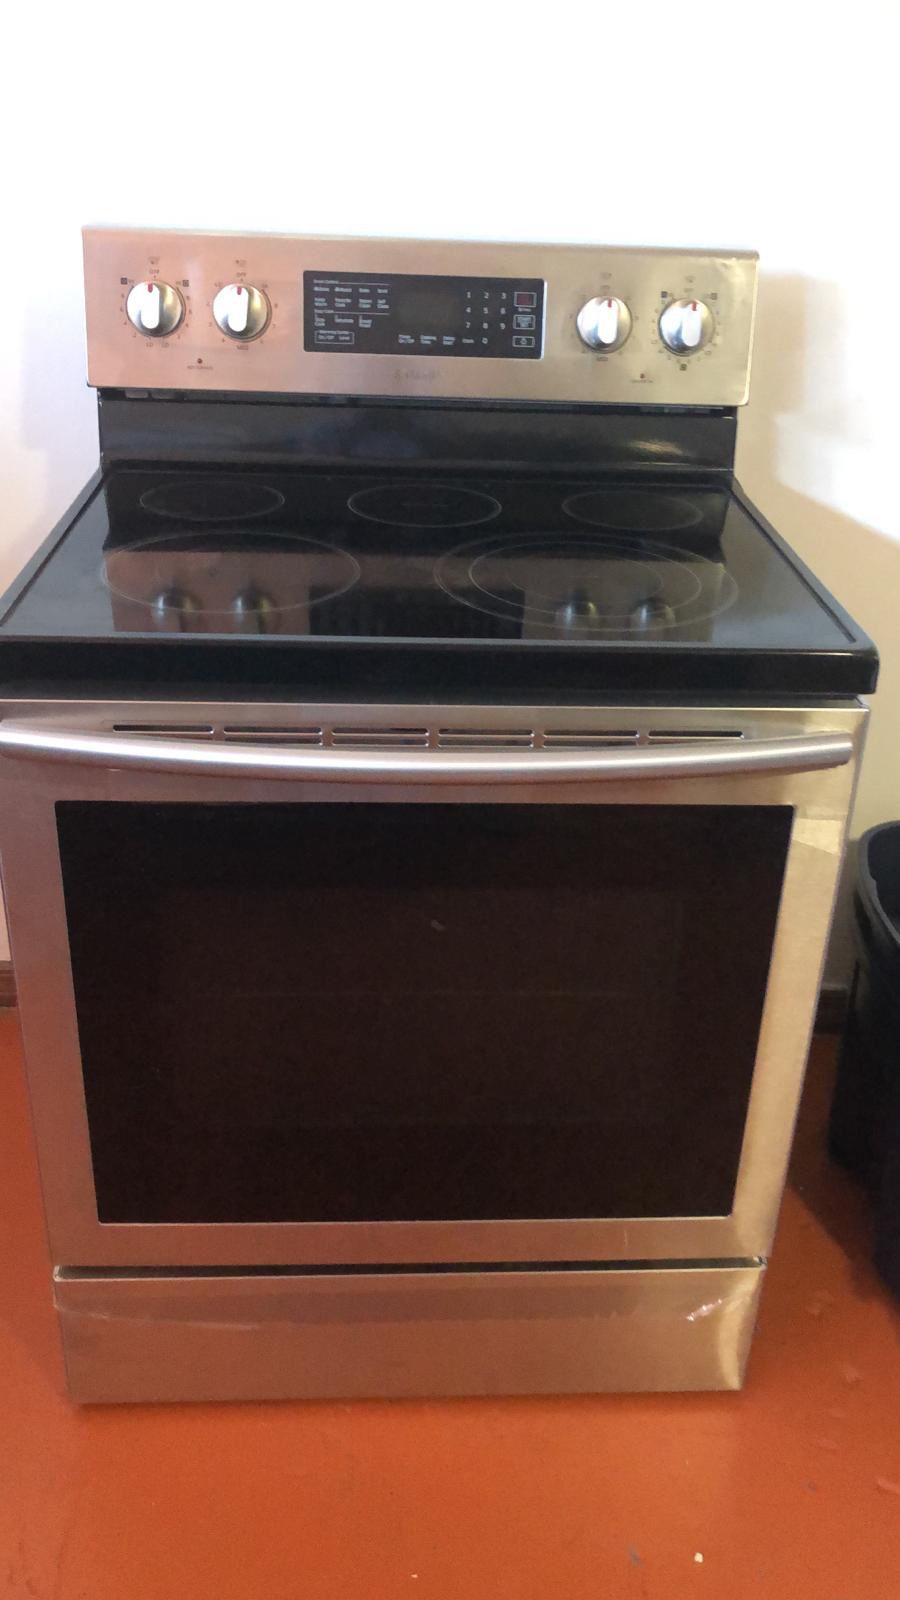 SAMSUNG STOVE - 30 in. 5.9 cu. ft. Convection Oven in Stainless Steel